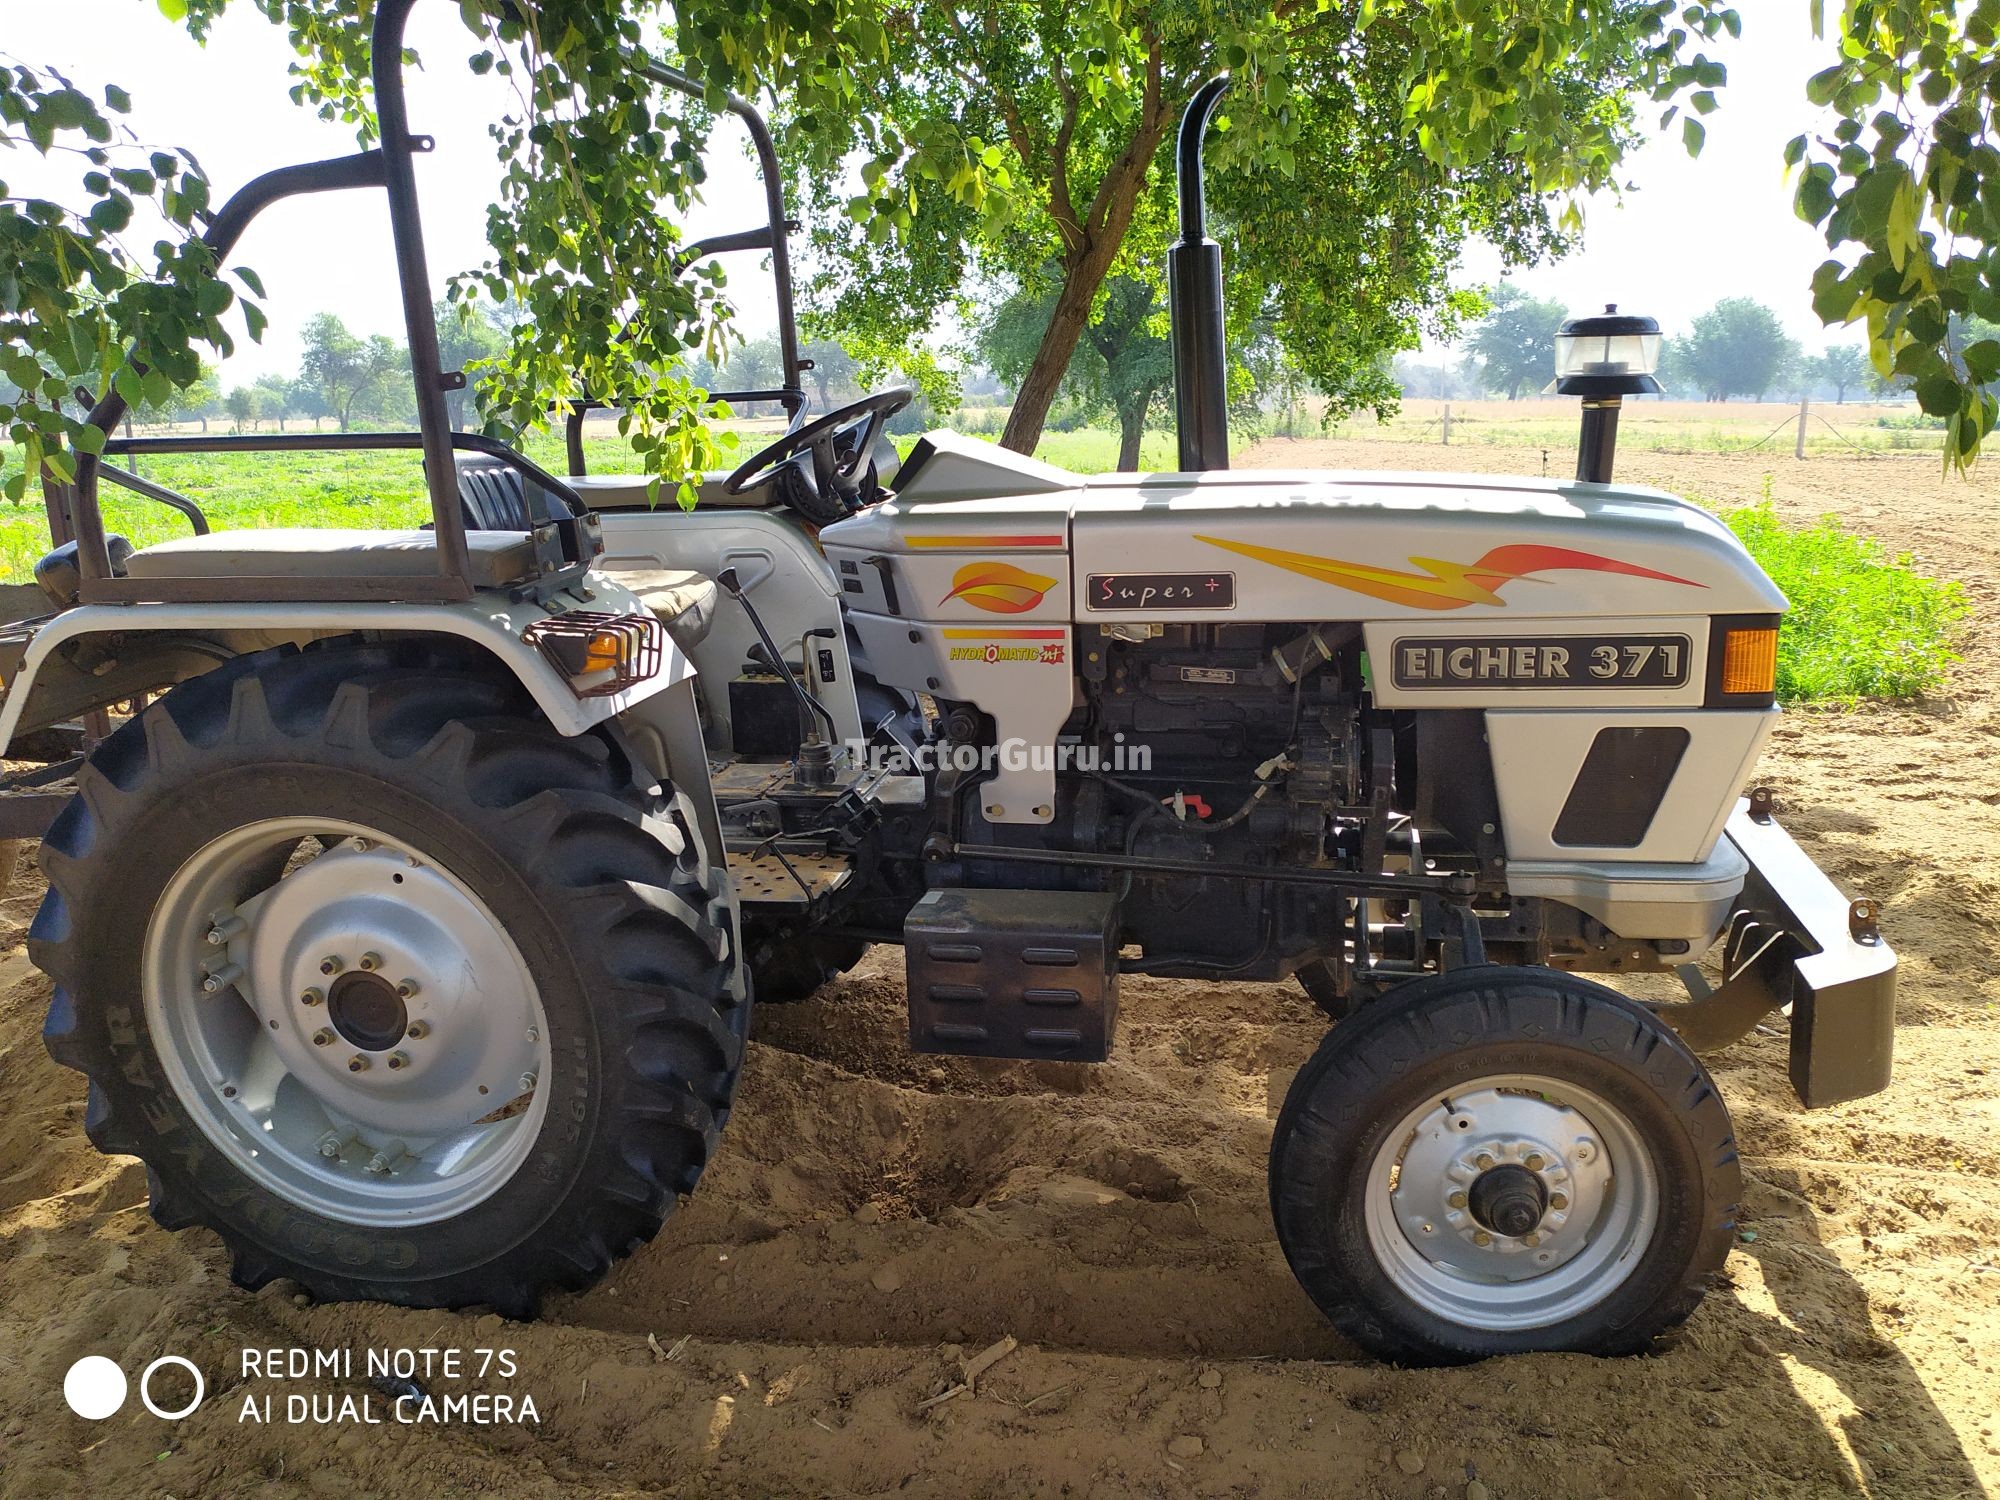 Get Second Hand Eicher 368  DI Tractor in Good Condition 